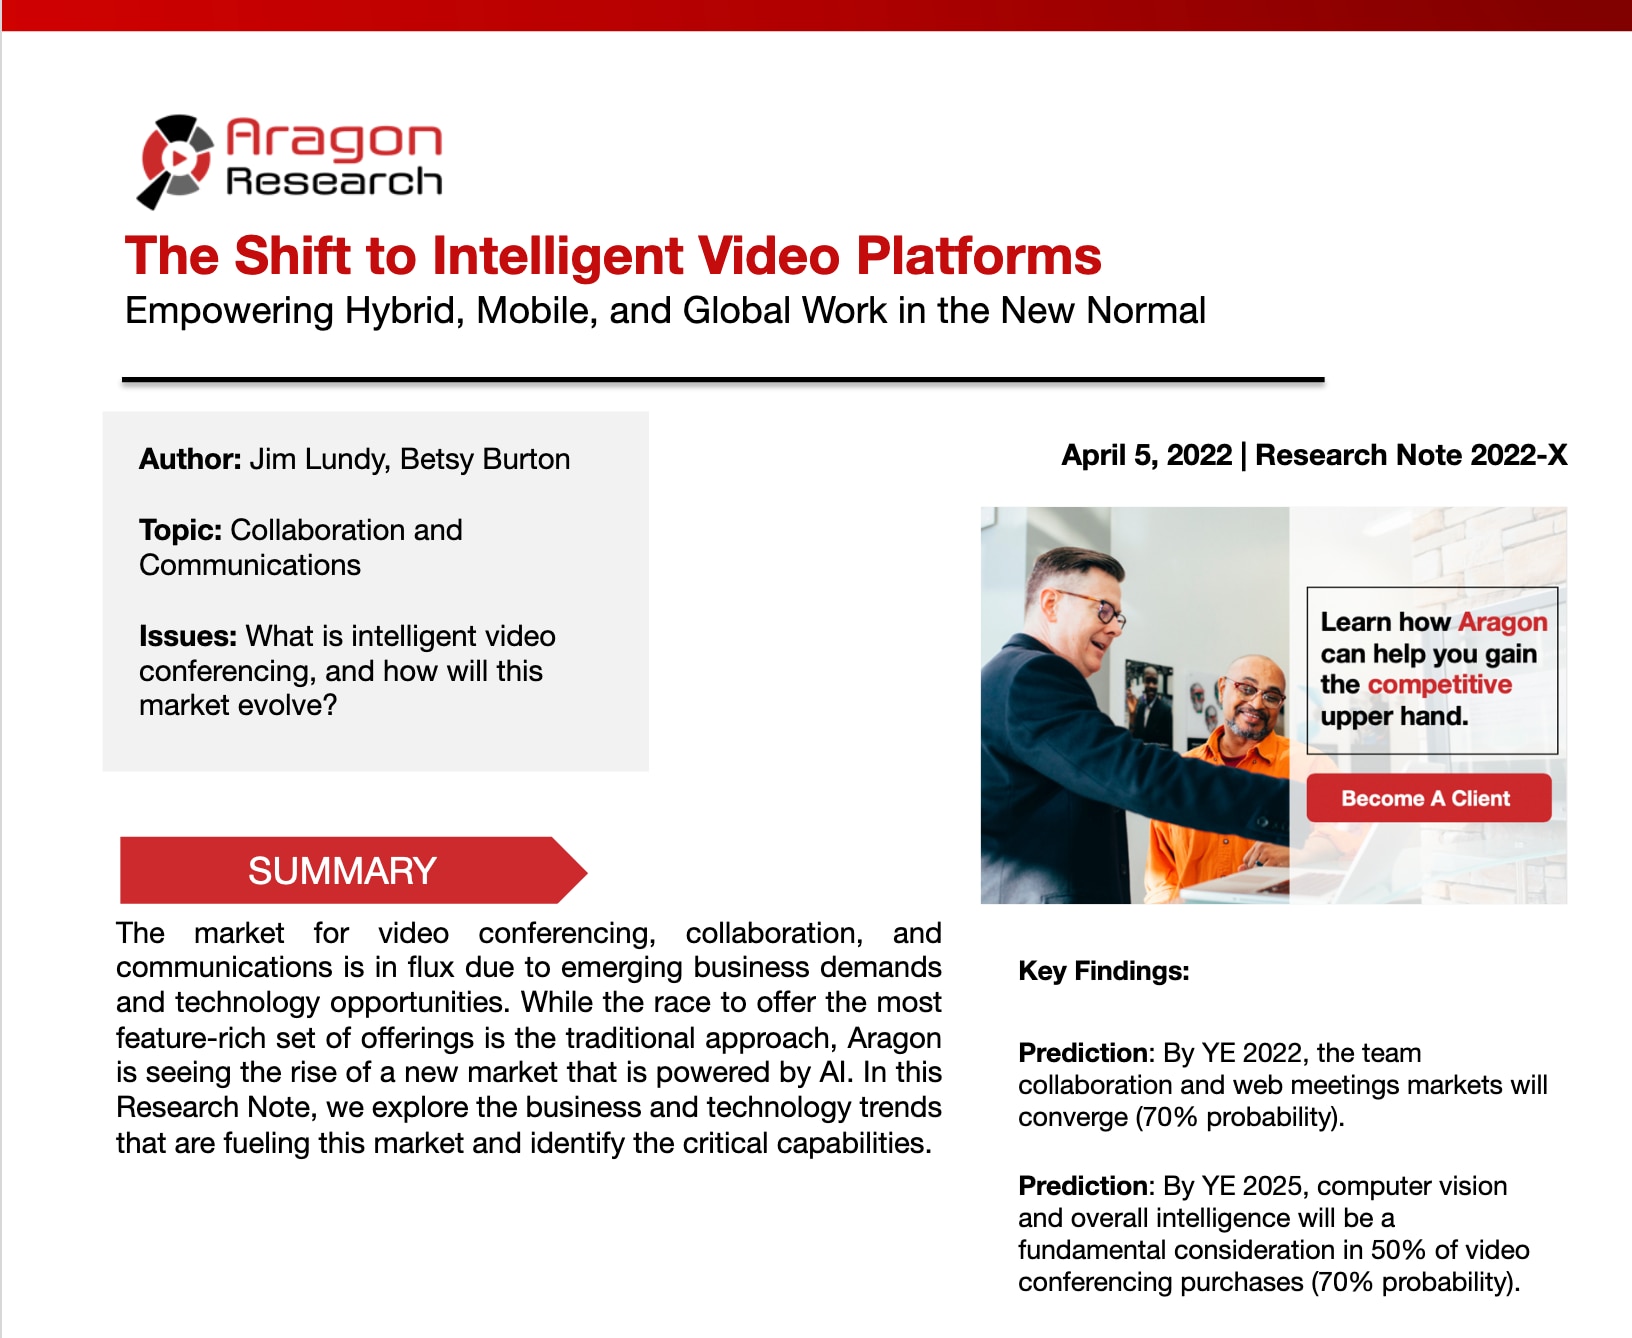 The Shift to Intelligent Video Platforms